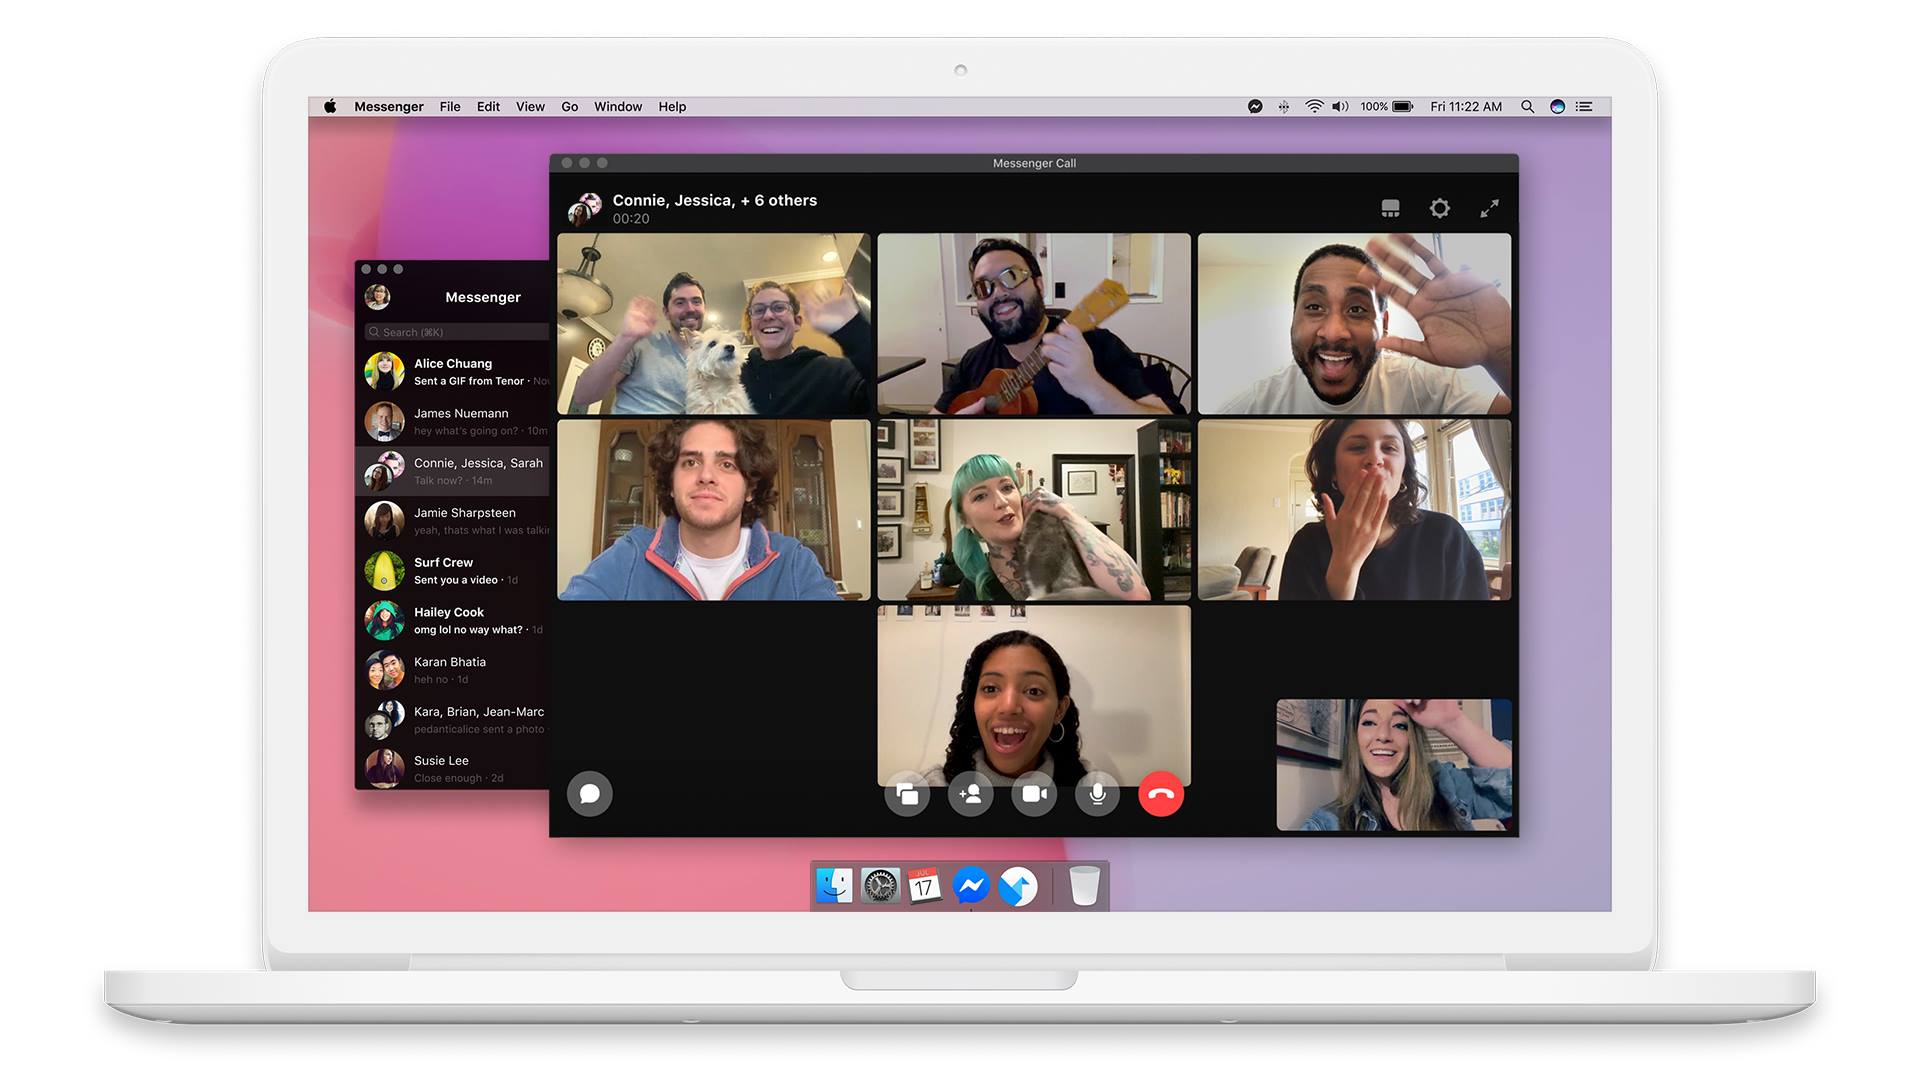 messenger cannot video chat on macbook